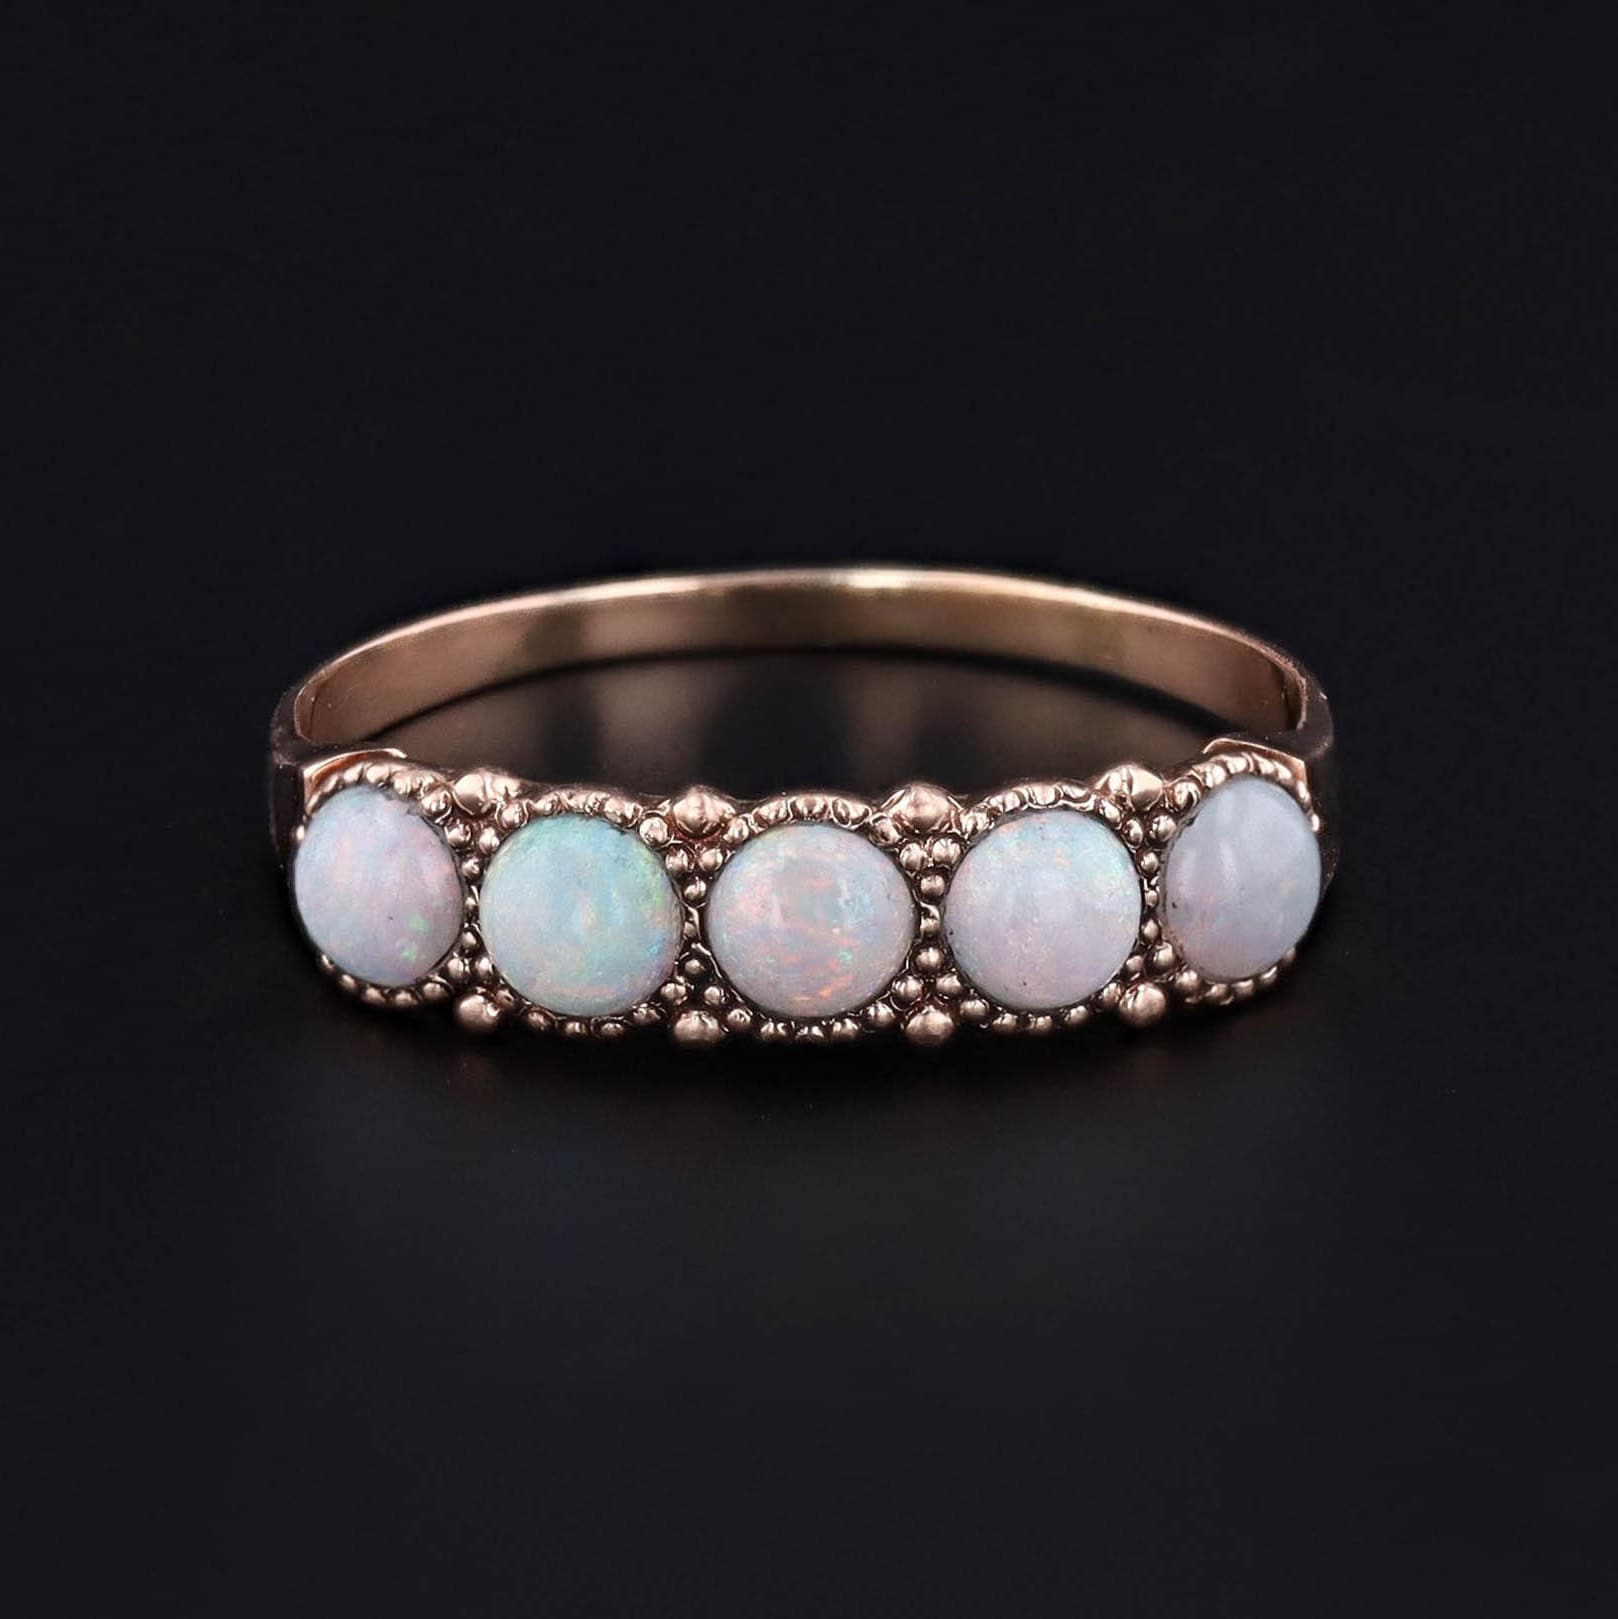 Antique Opal Ring | Five Opal Row Ring 